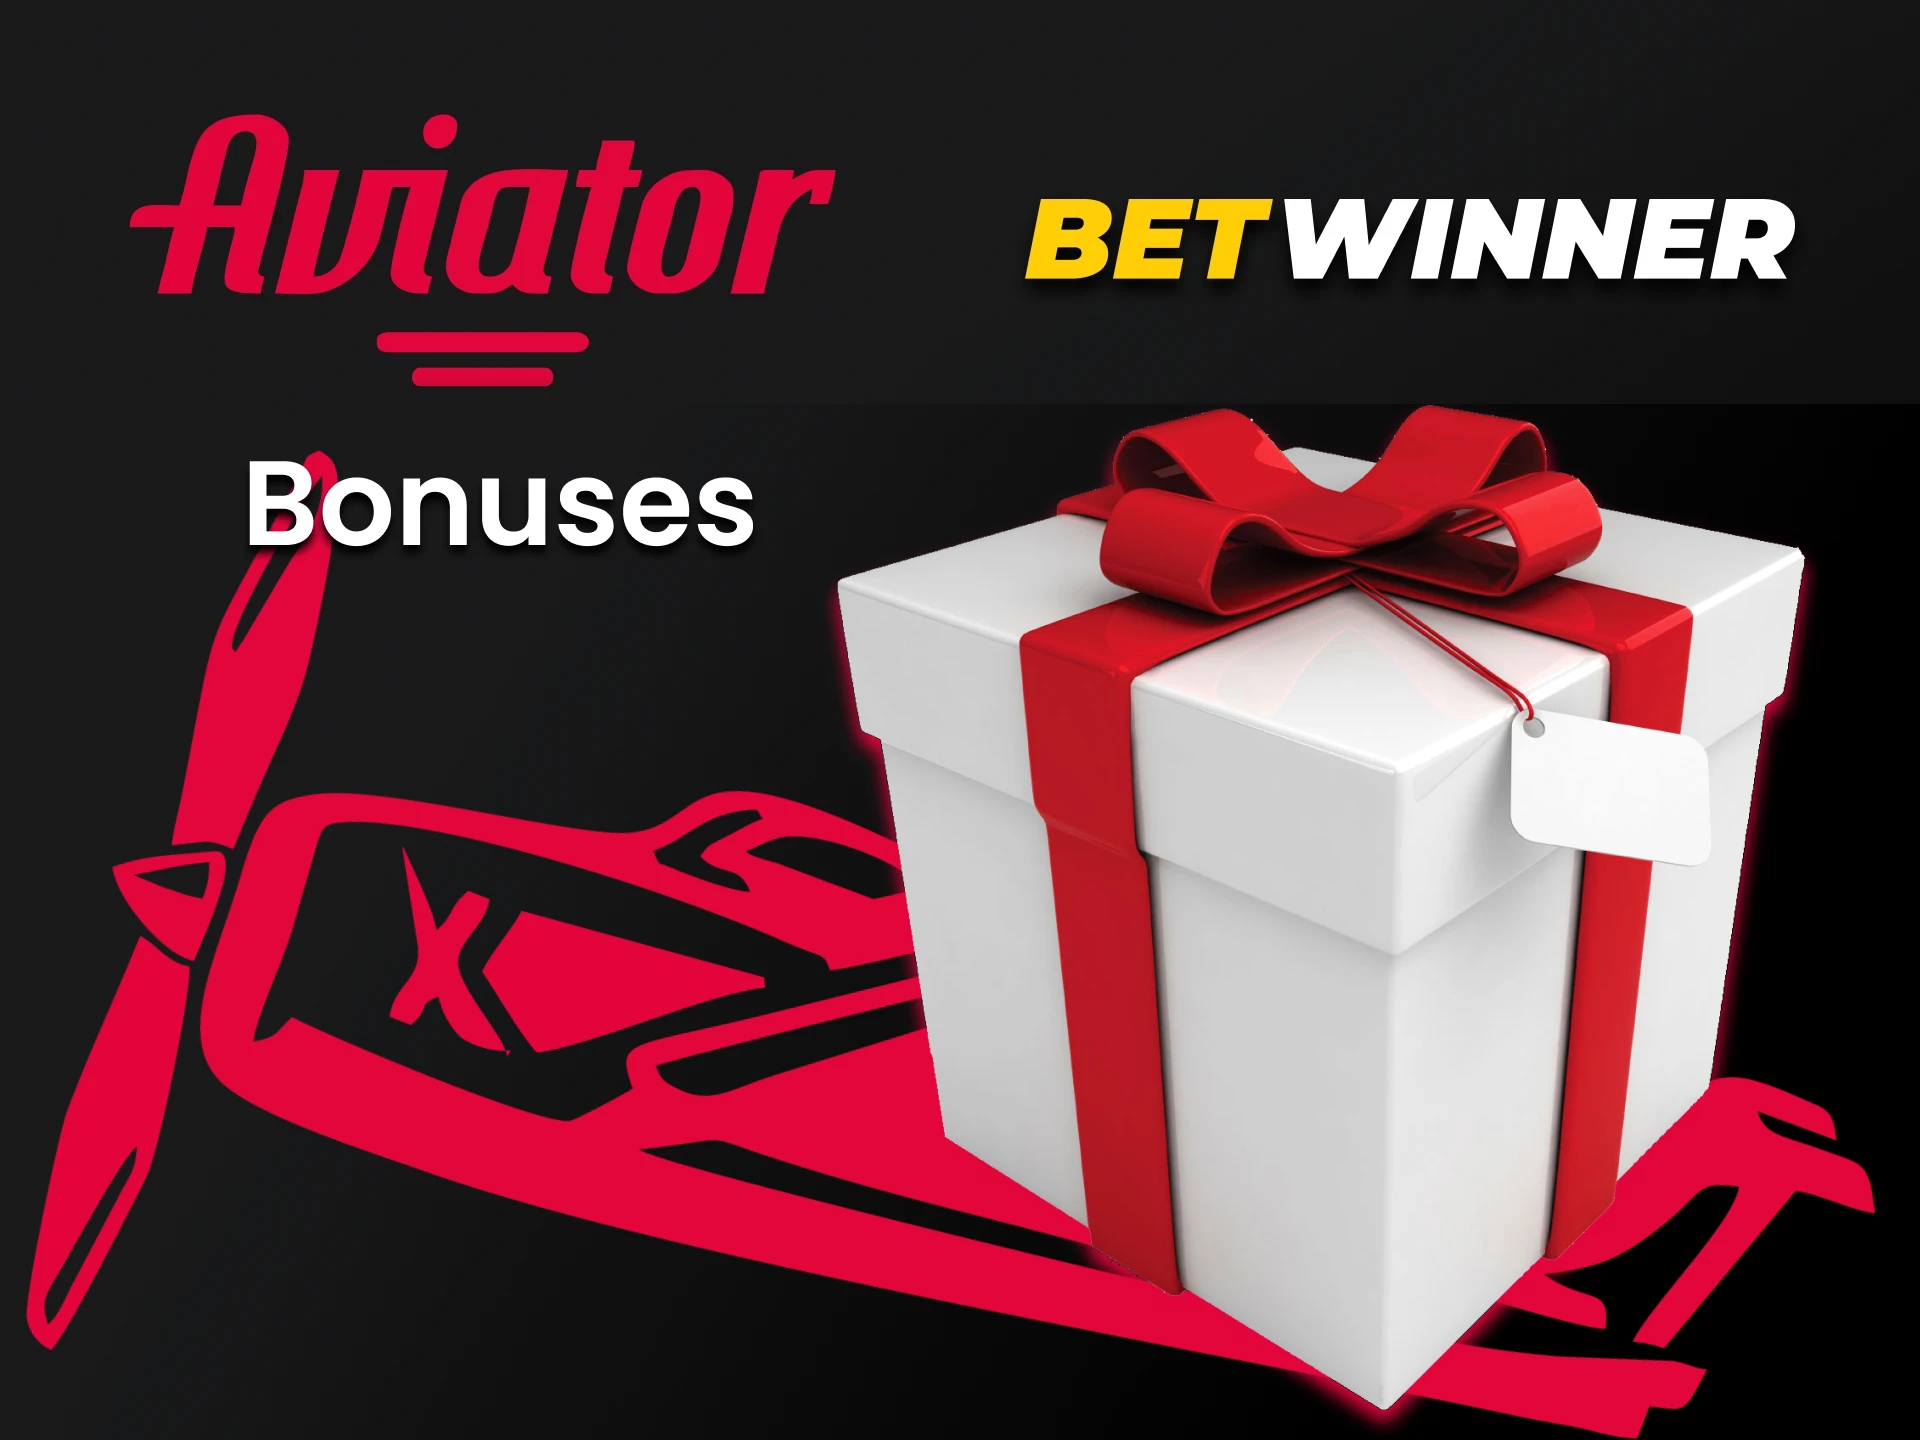 Get profitable bonuses after registering with Betwinner.